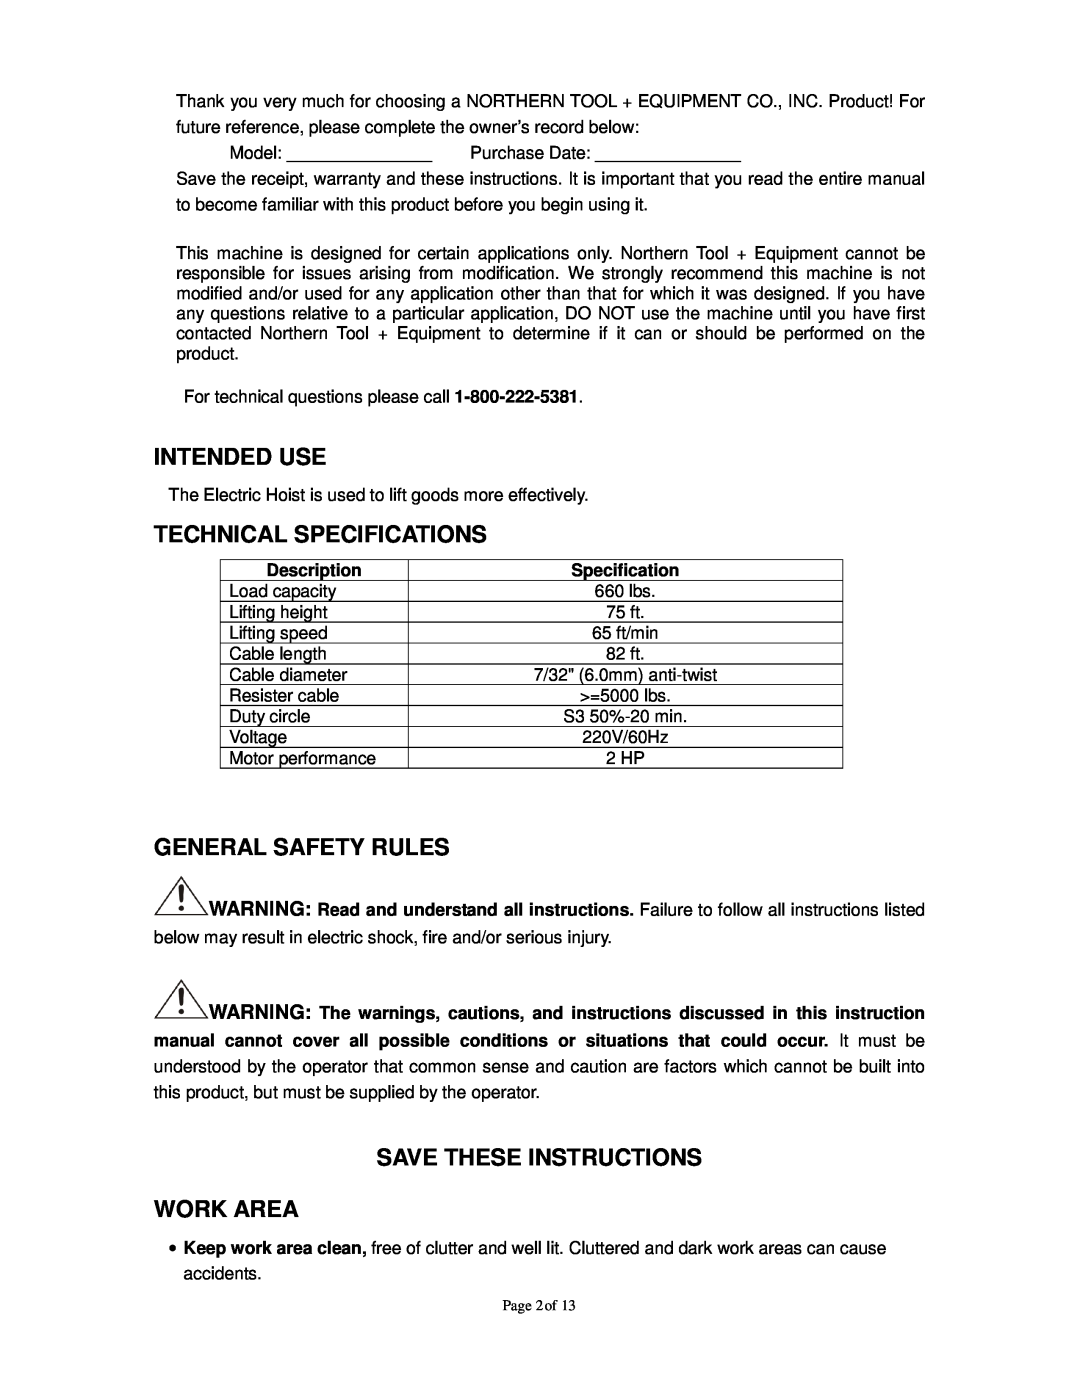 Northern Industrial Tools 142264 owner manual Intended Use, Technical Specifications, General Safety Rules, Description 